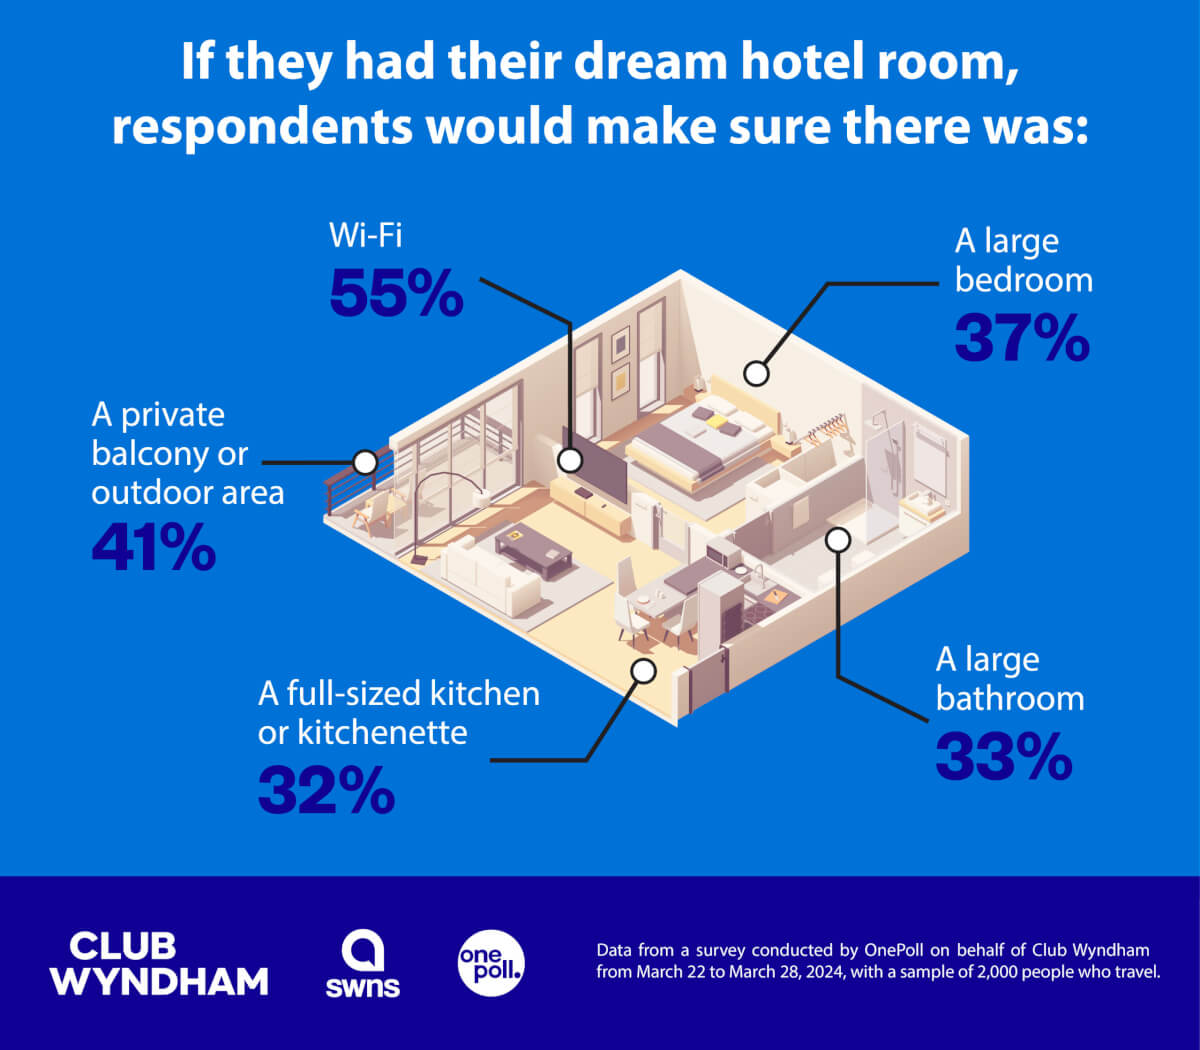 infographic on the wish list people have for their dream hotel room